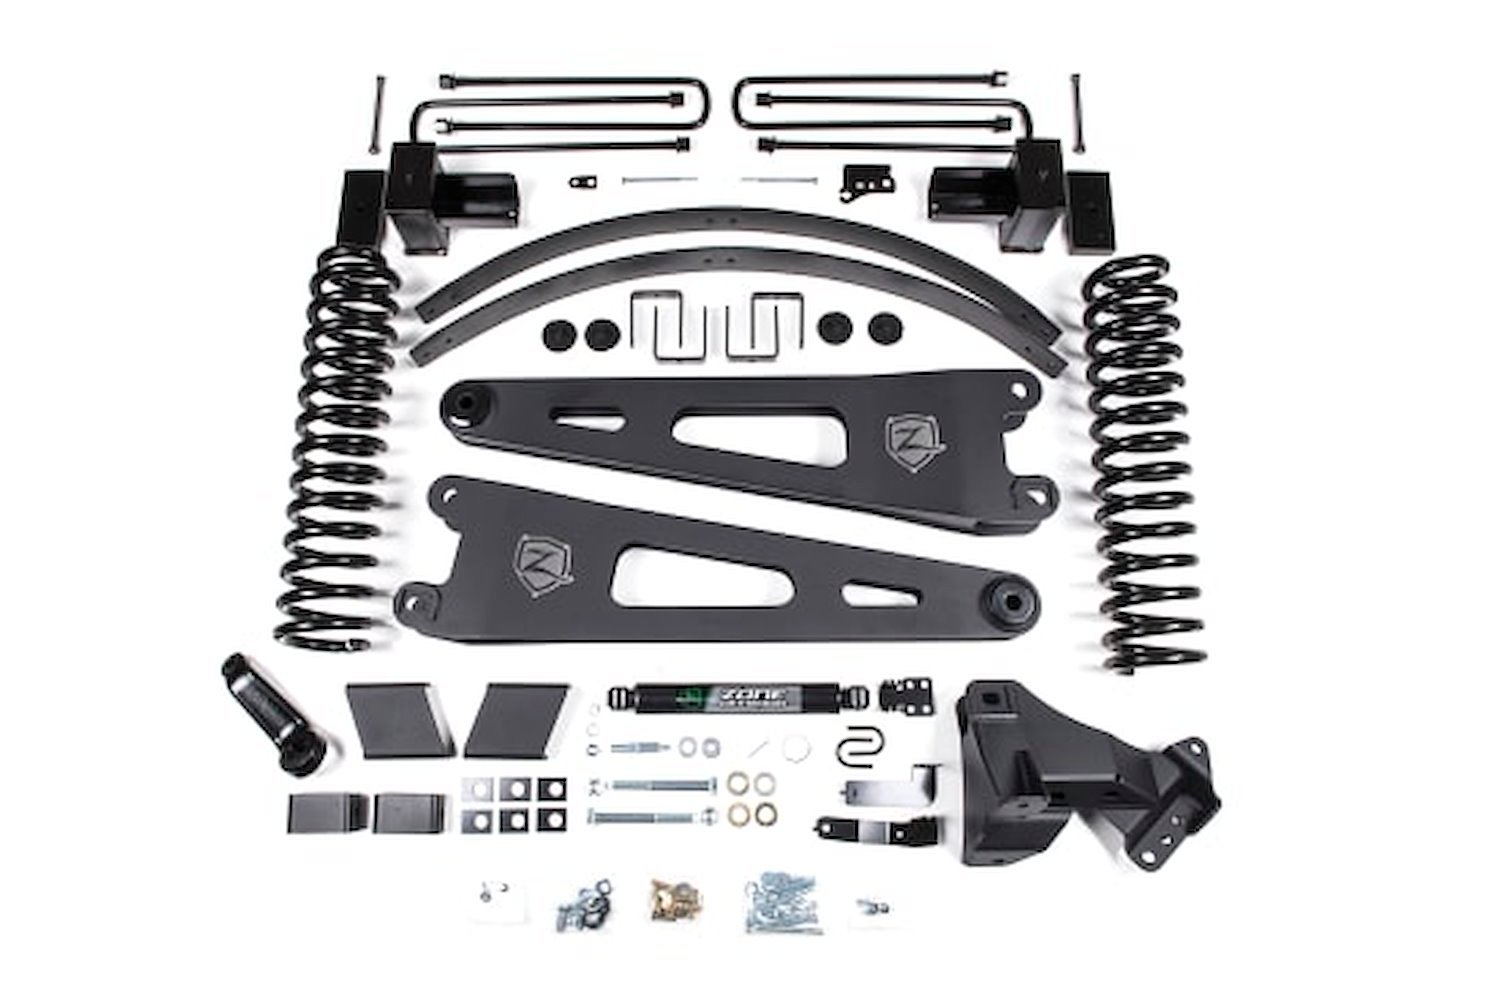 ZONF52N Zone 6" Radius Arm Lift Kit for 2017 Ford F-250/350